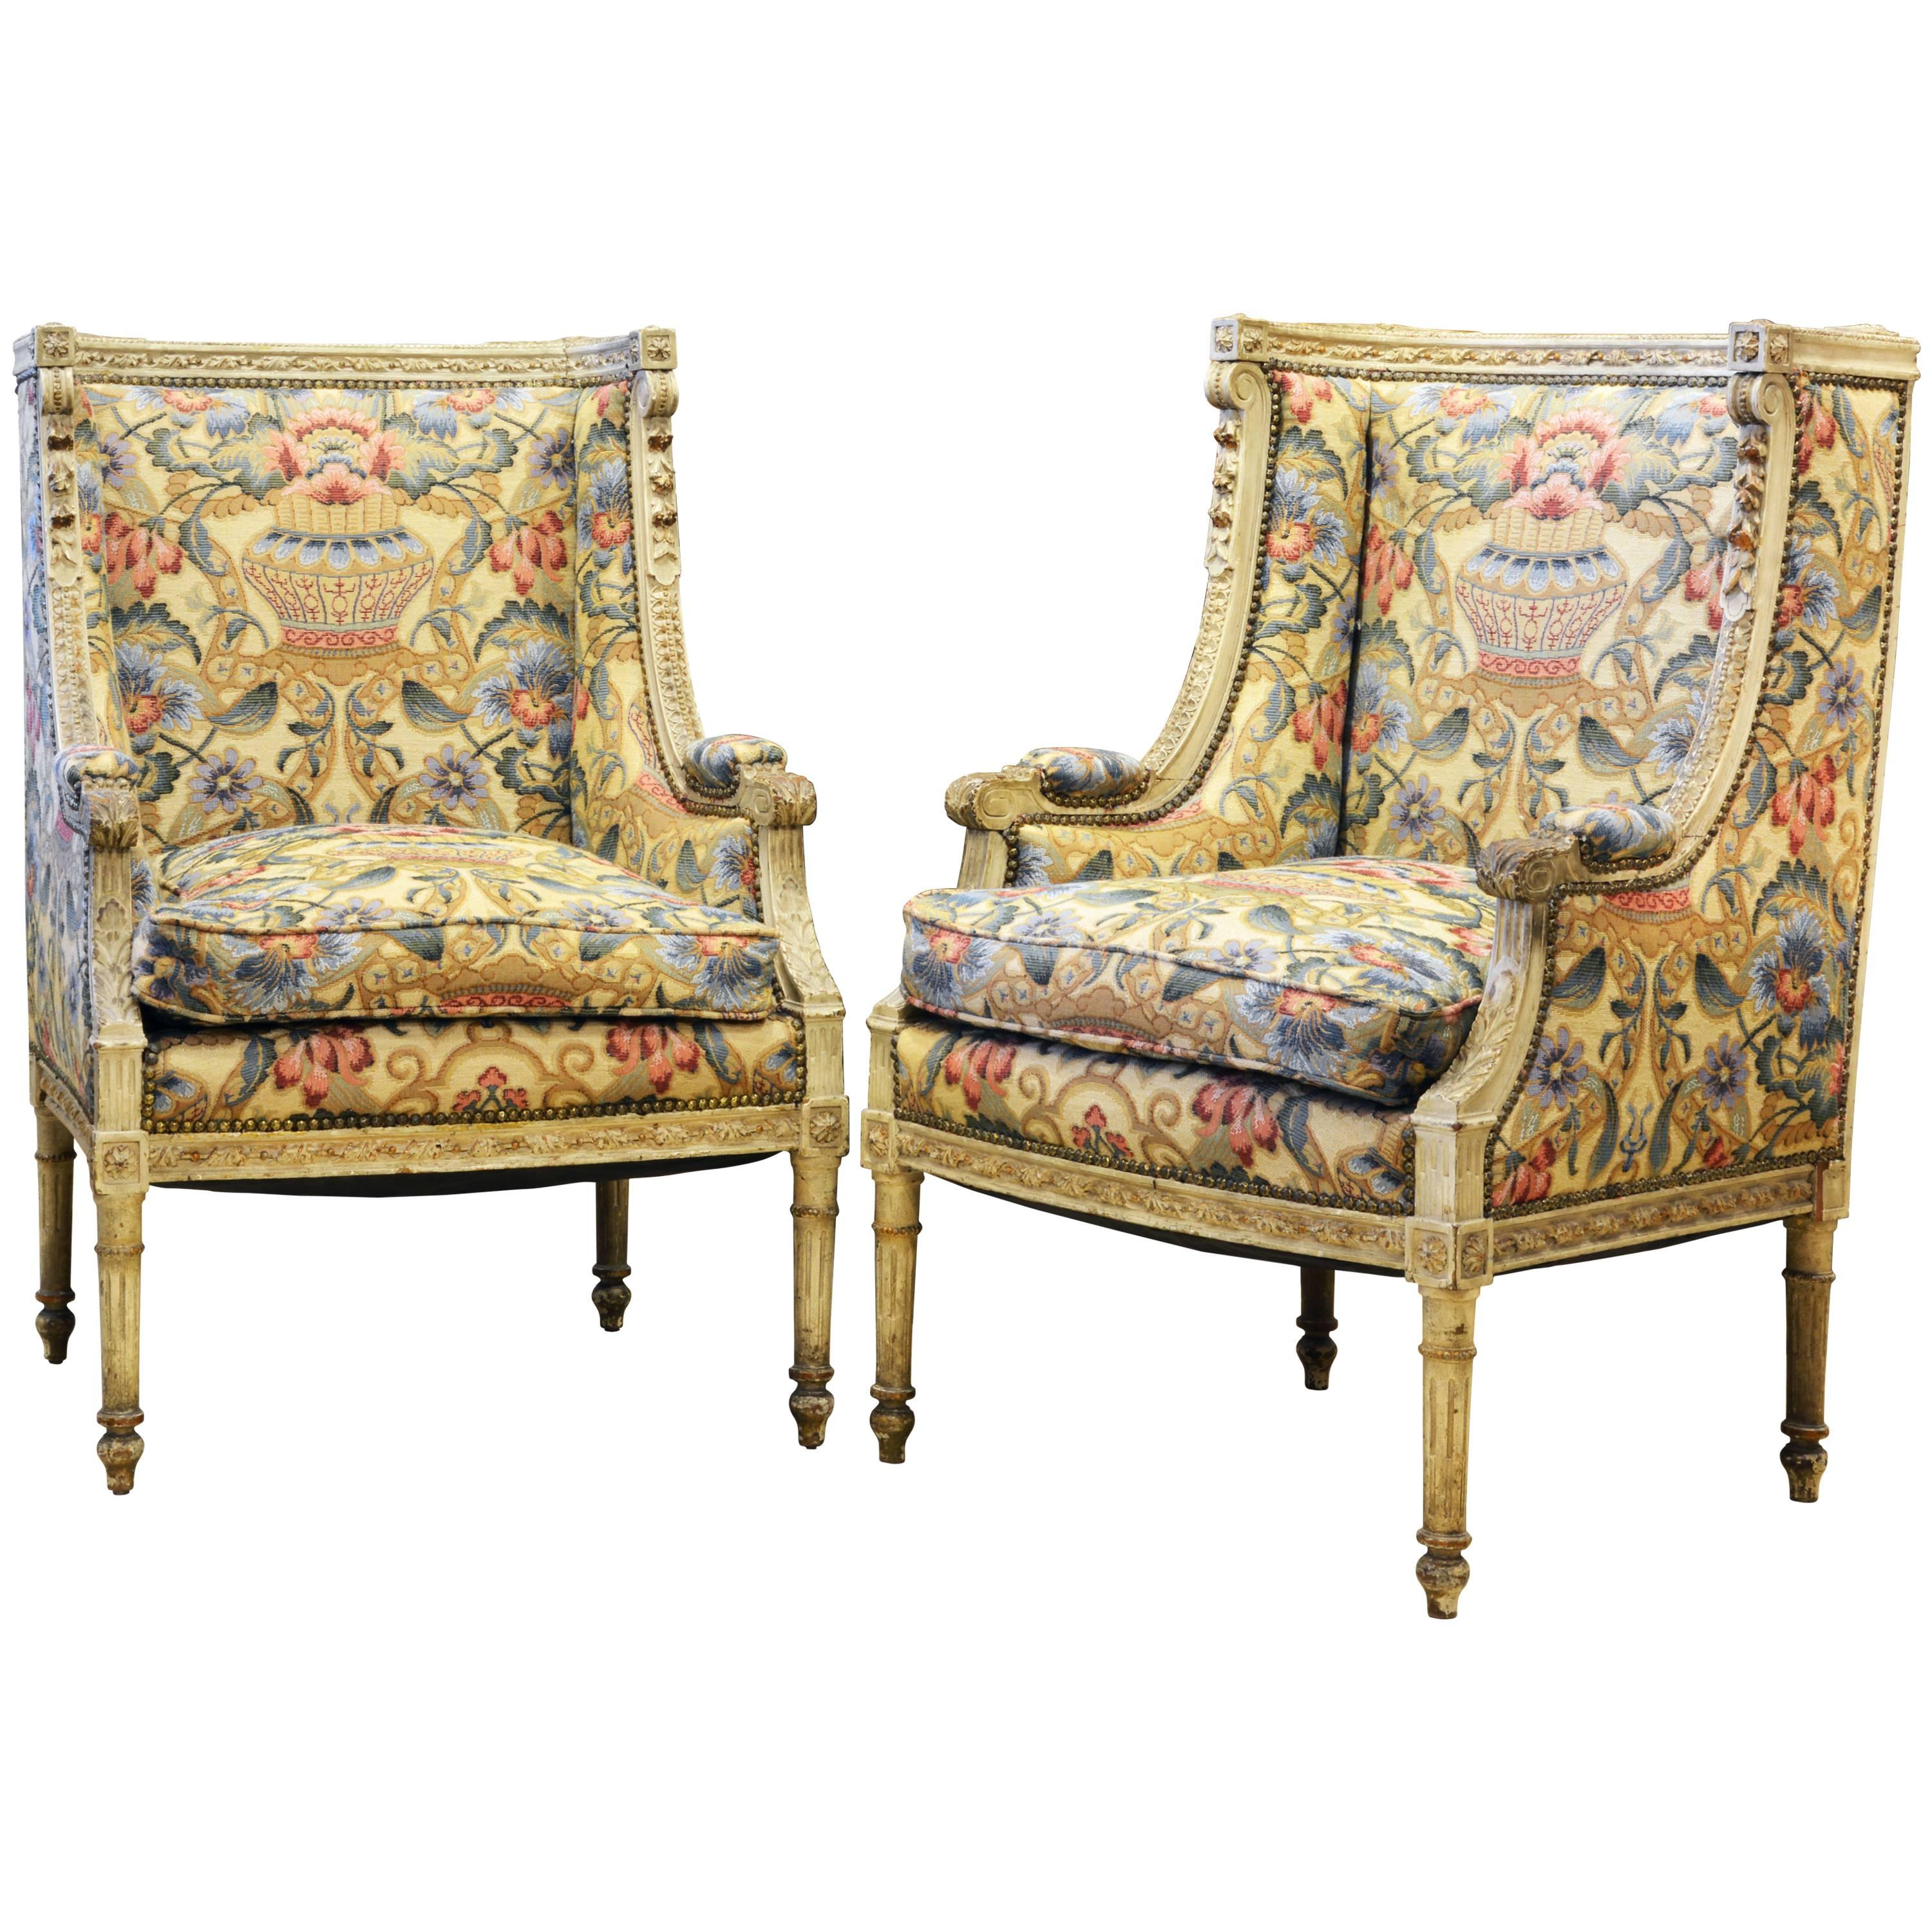 Pair of Late 19th Century, Louis XVI Style Carved Bergeres with Aubusson Cover